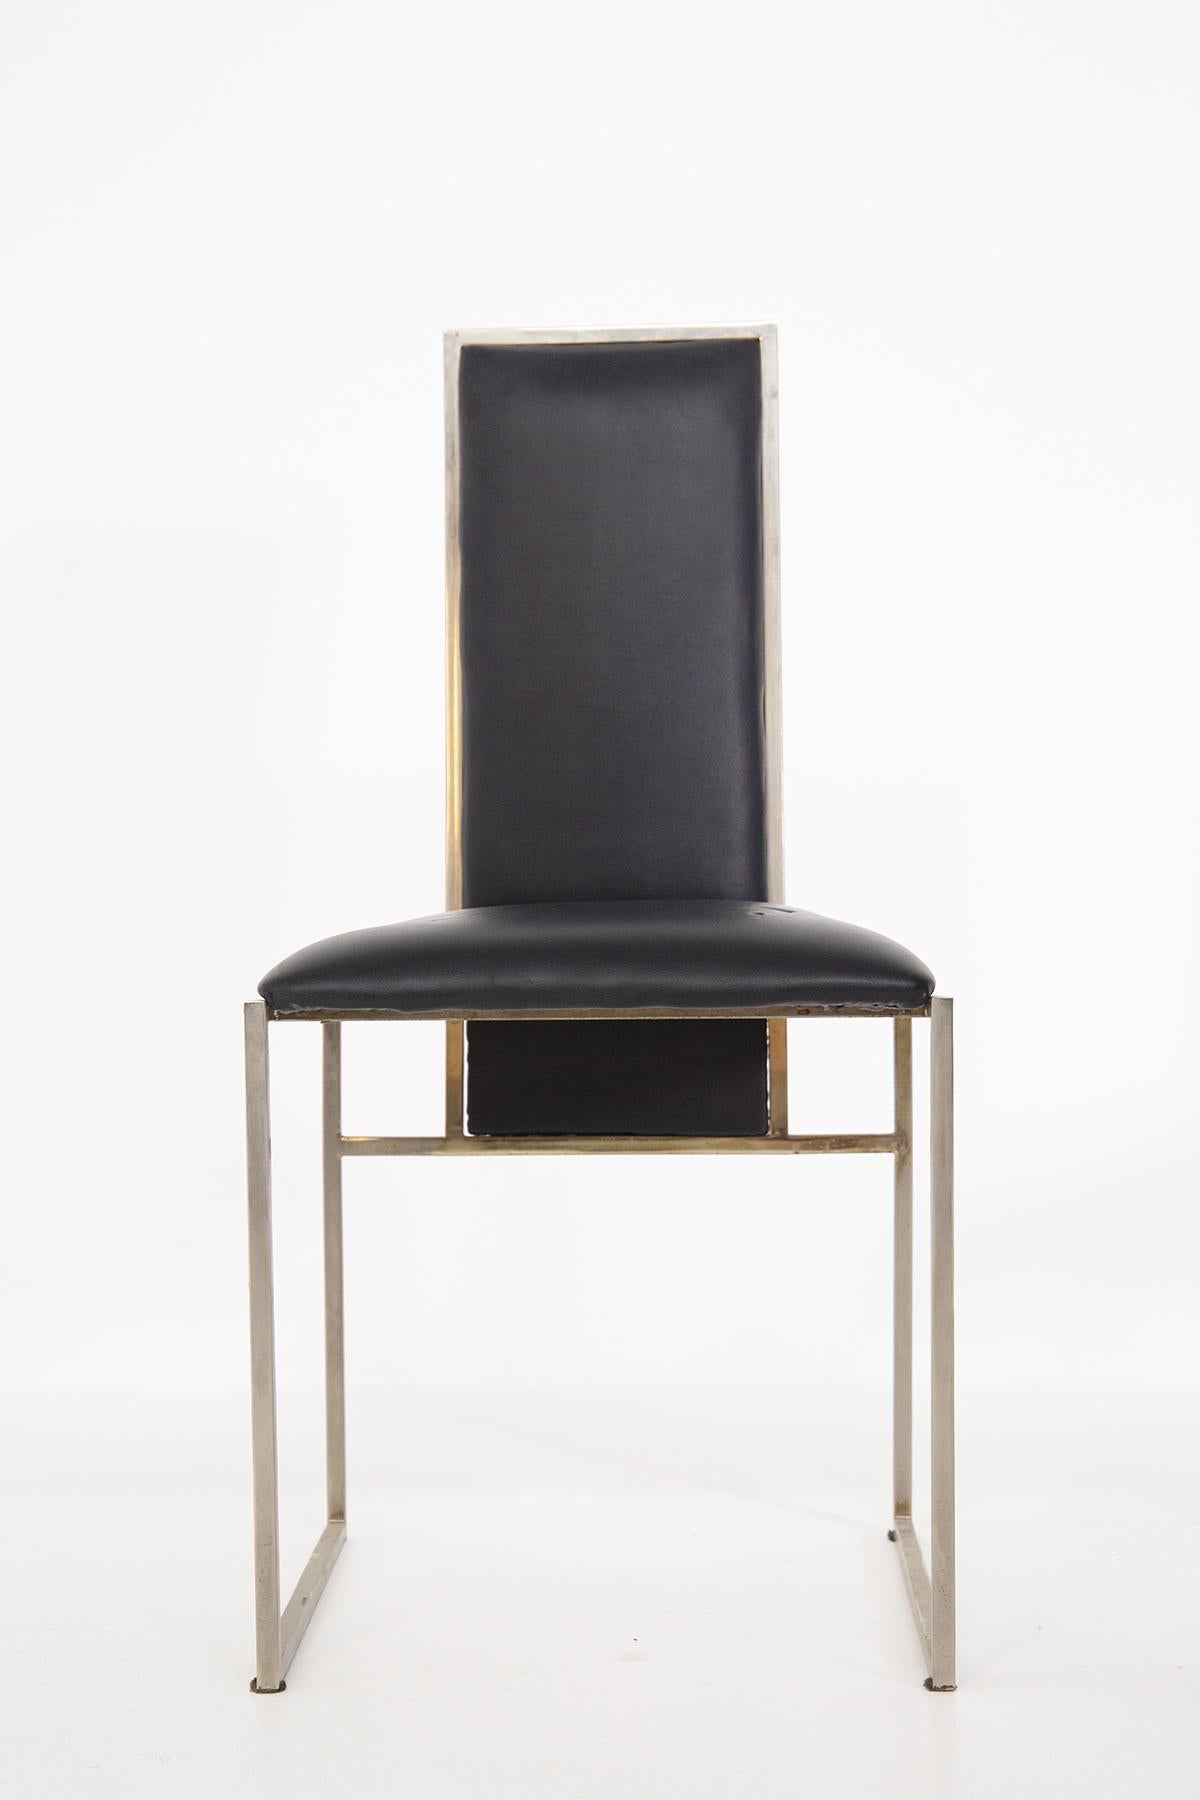 Romeo Rega Set of Six Dining Chair in Black Leather and Steel 1